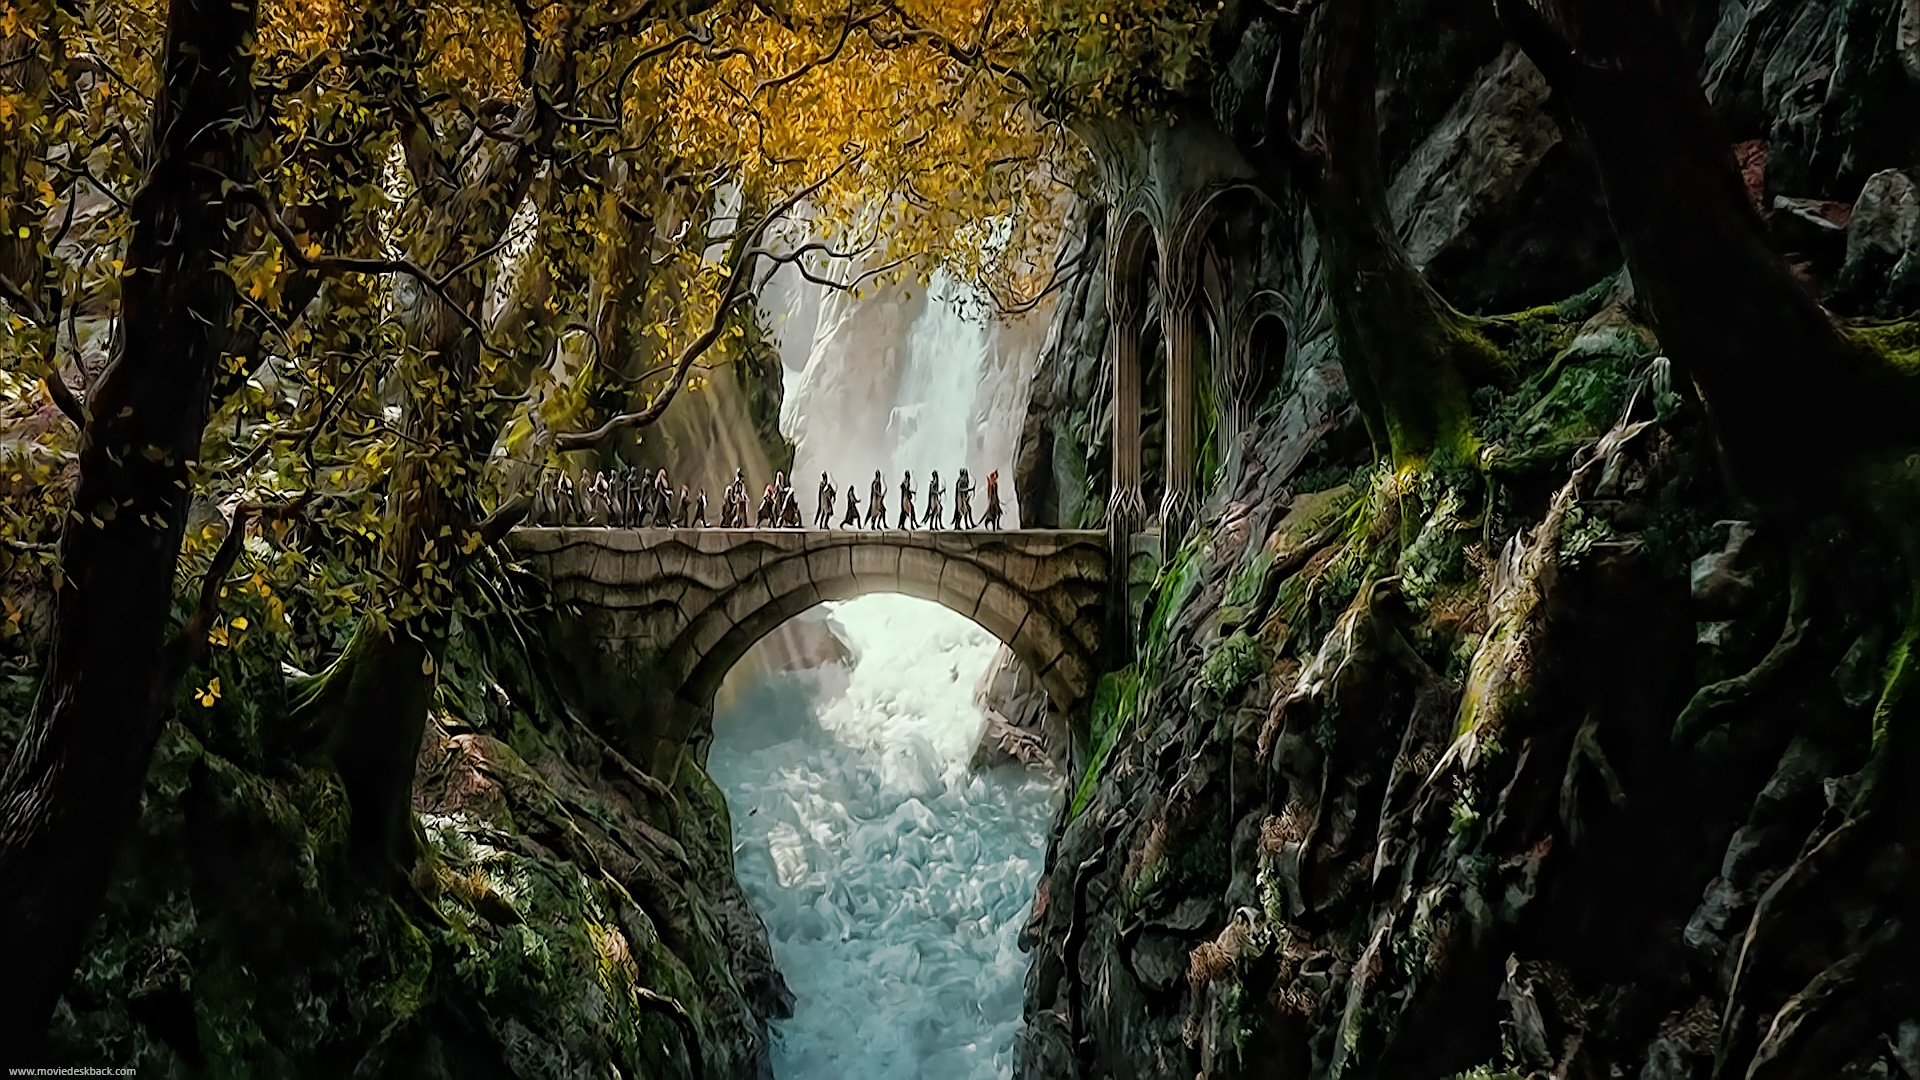 The Hobbit The Battle of The Five Armies Angry Smaug HD Wallpaper | The  Hobbit | Pinterest | Hobbit, Hd wallpaper and Army